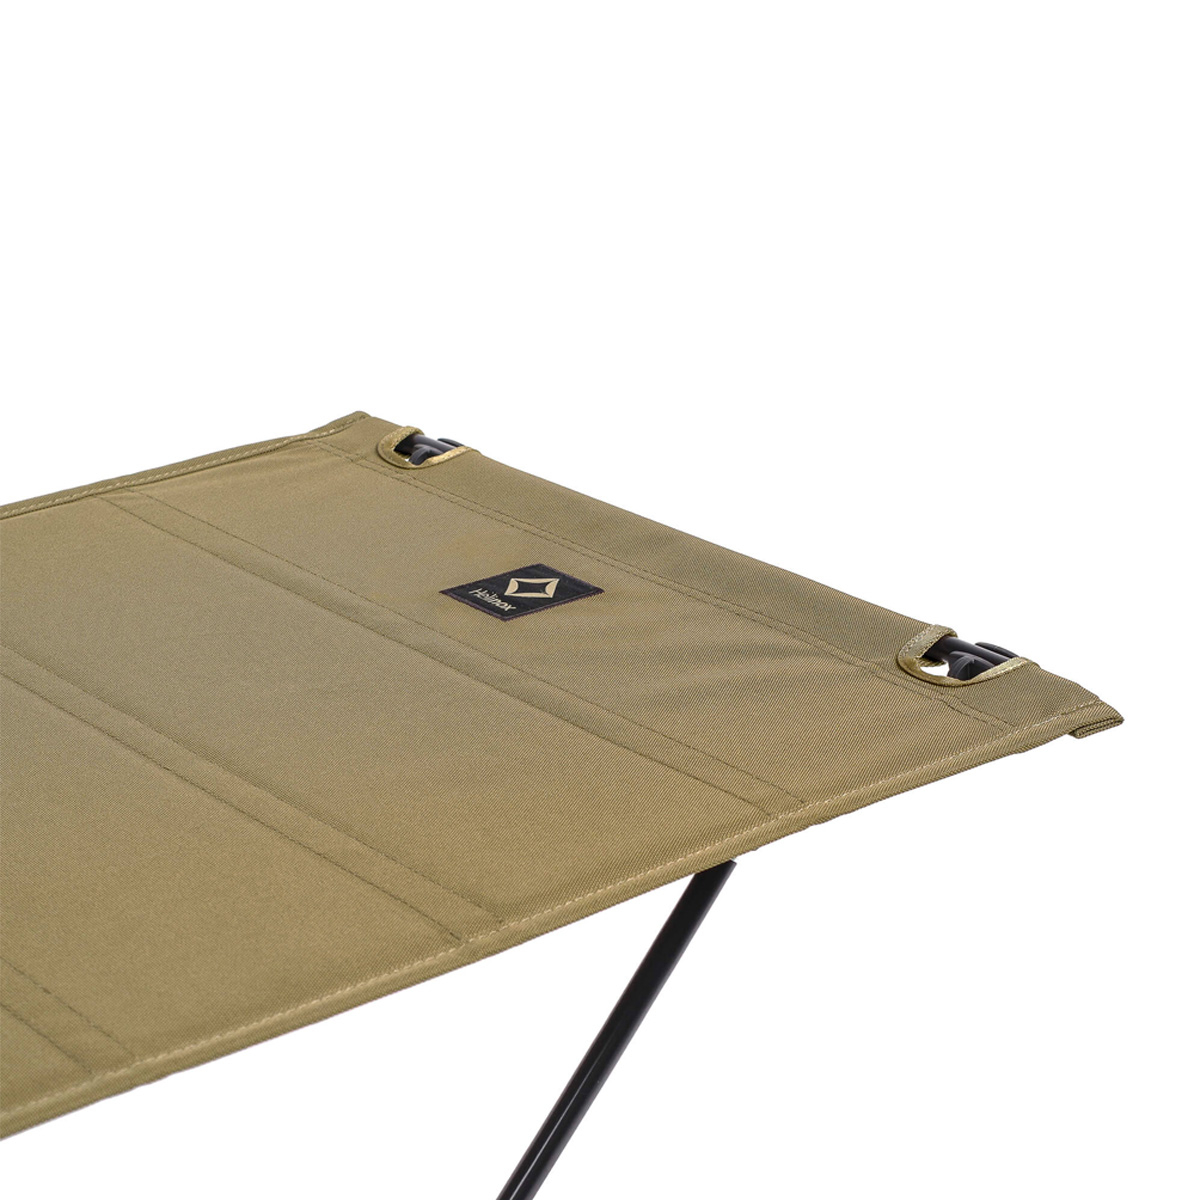 Helinox Tactical Tactical Table Coyote Tan fabric, bluesign®-certified und recycled 600D polyester